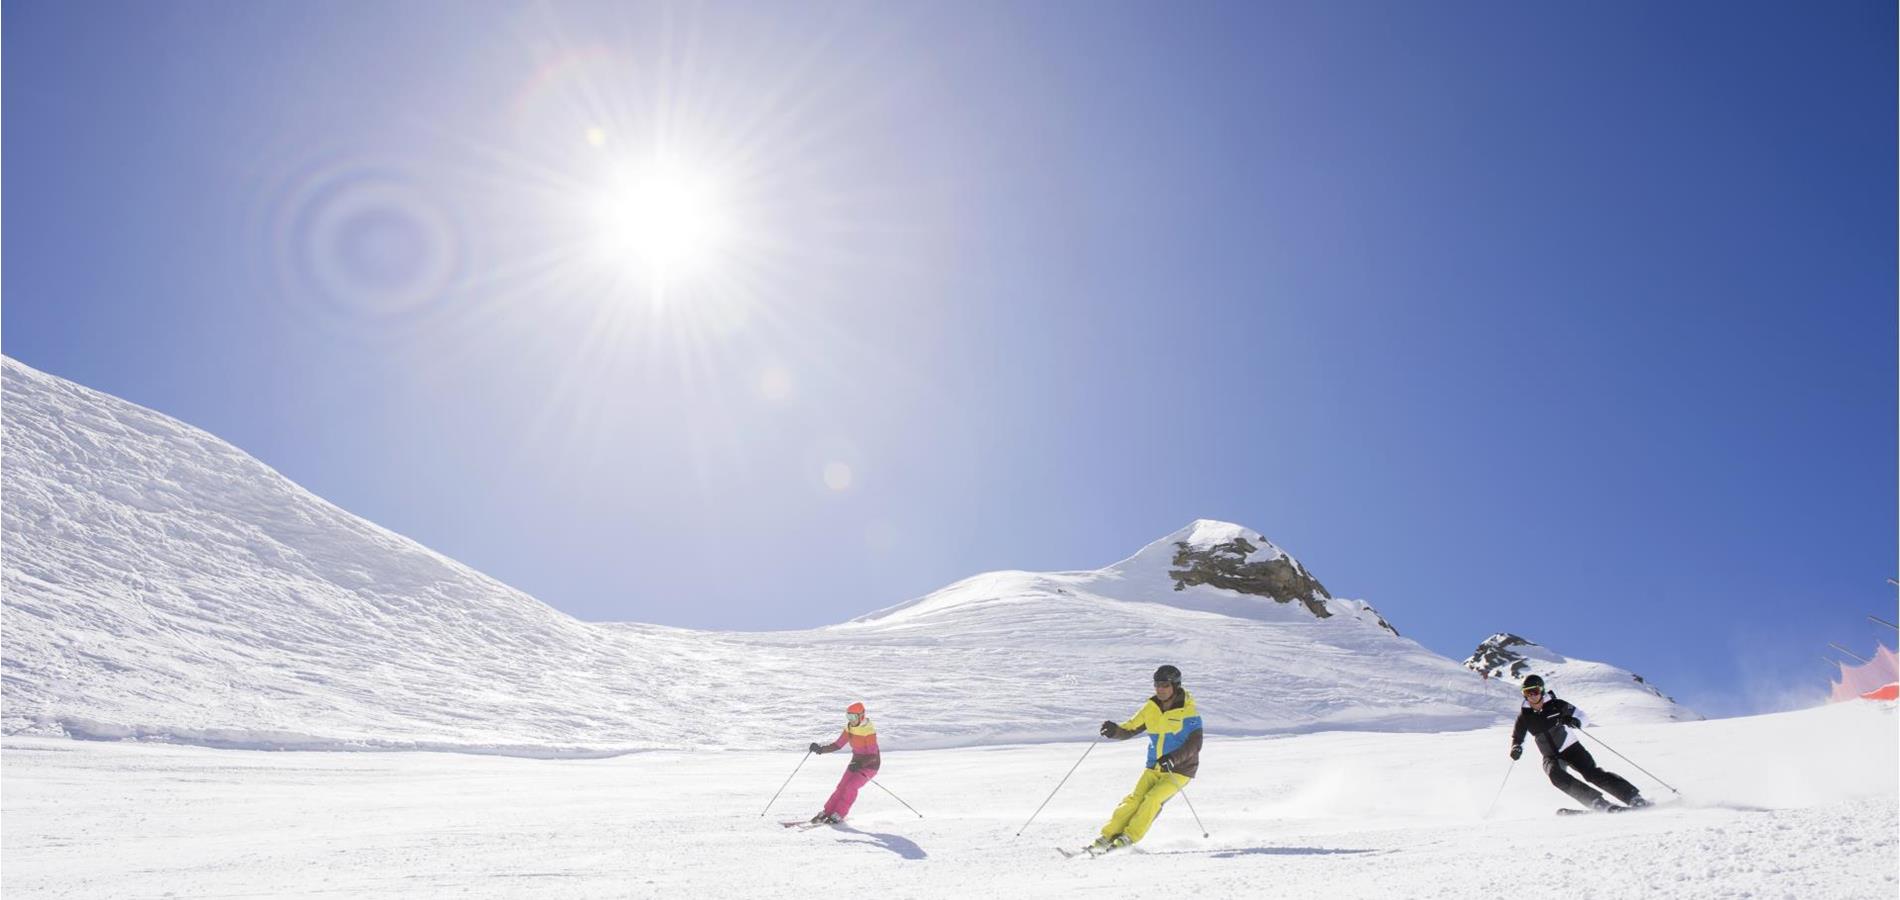 5 life hacks for your skiing holiday